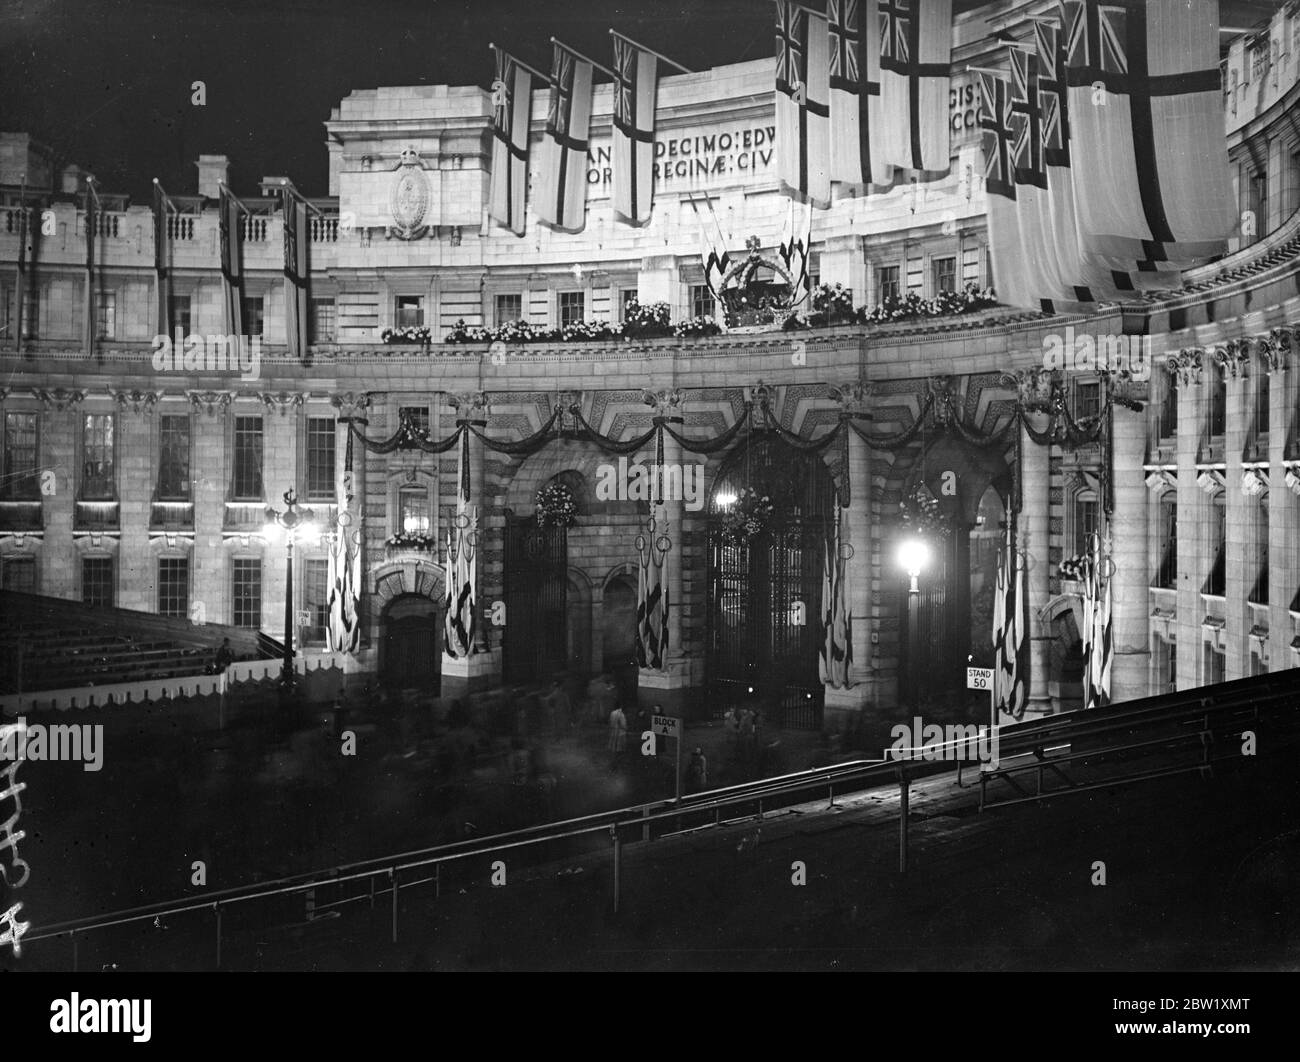 London floodlit for Coronation season - crowds gather for spectacle. Great crowds gather on the first official night of the Coronation floodlighting. All London's most important buildings are illuminated and the entire area is closed to traffic. Photo shows: the Admiralty Arch under floodlights. 13 May 1937 Stock Photo